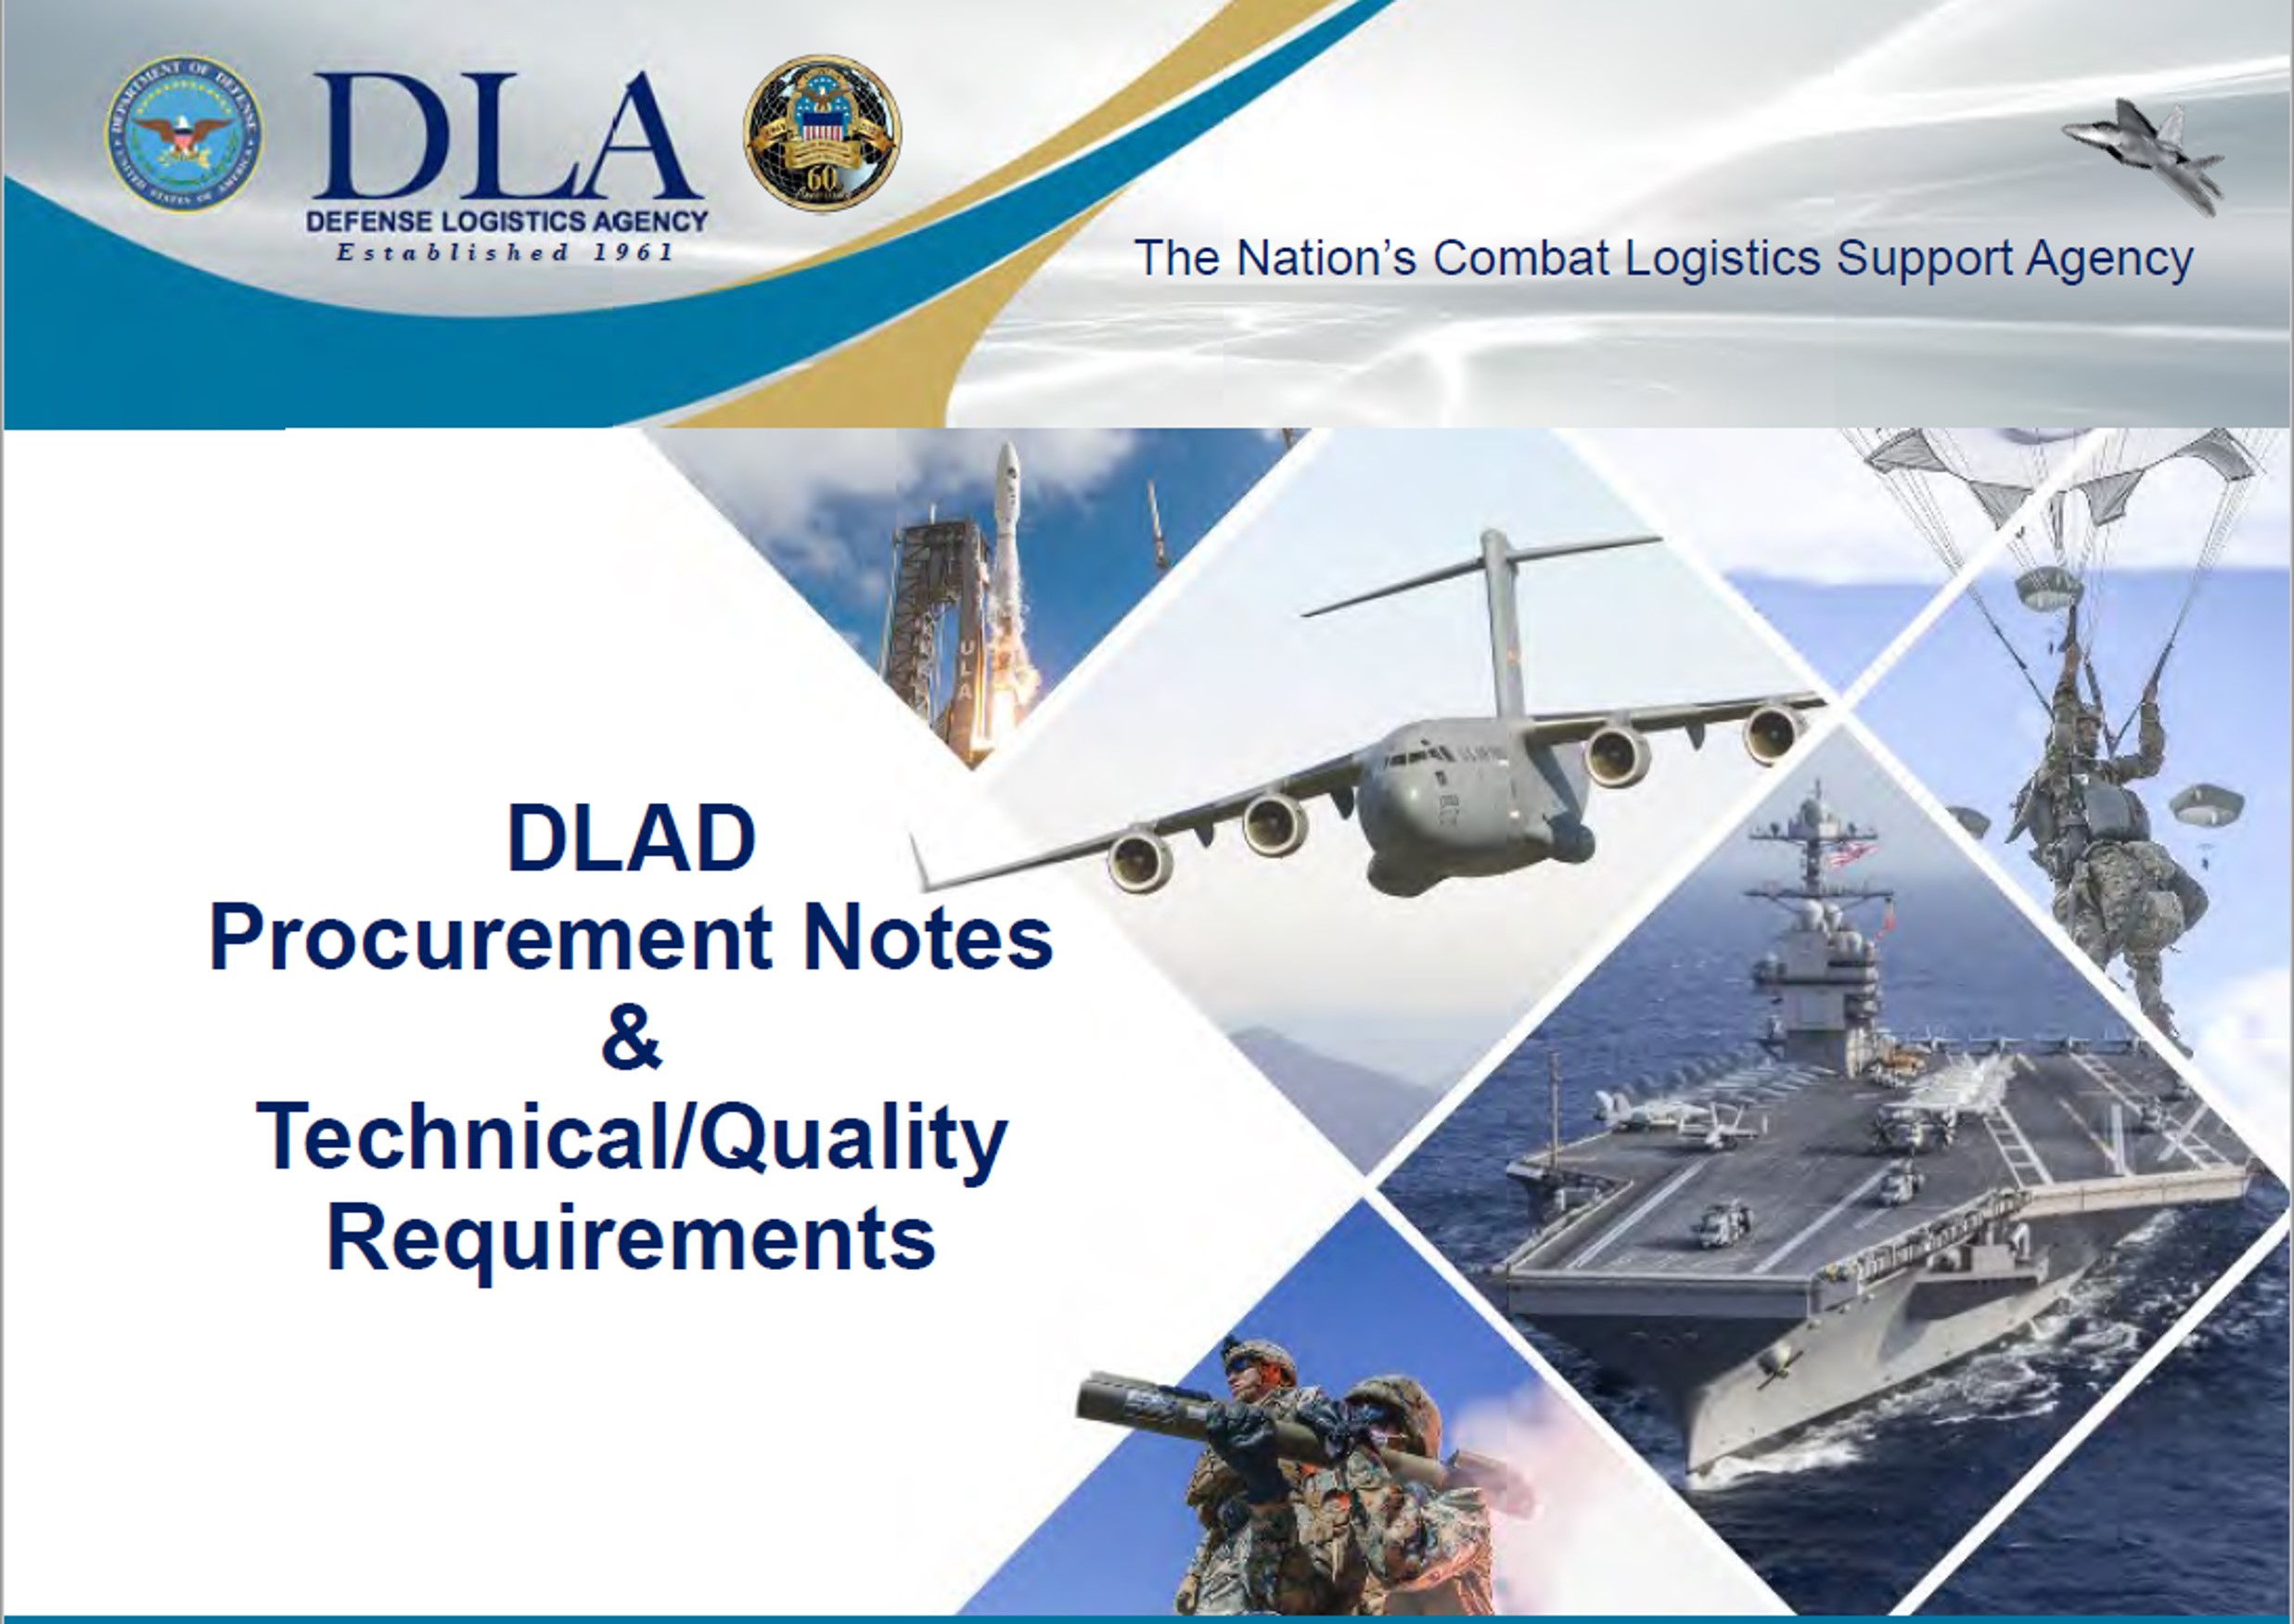 DLA Procurement Notes and Technical/Quality Requirements